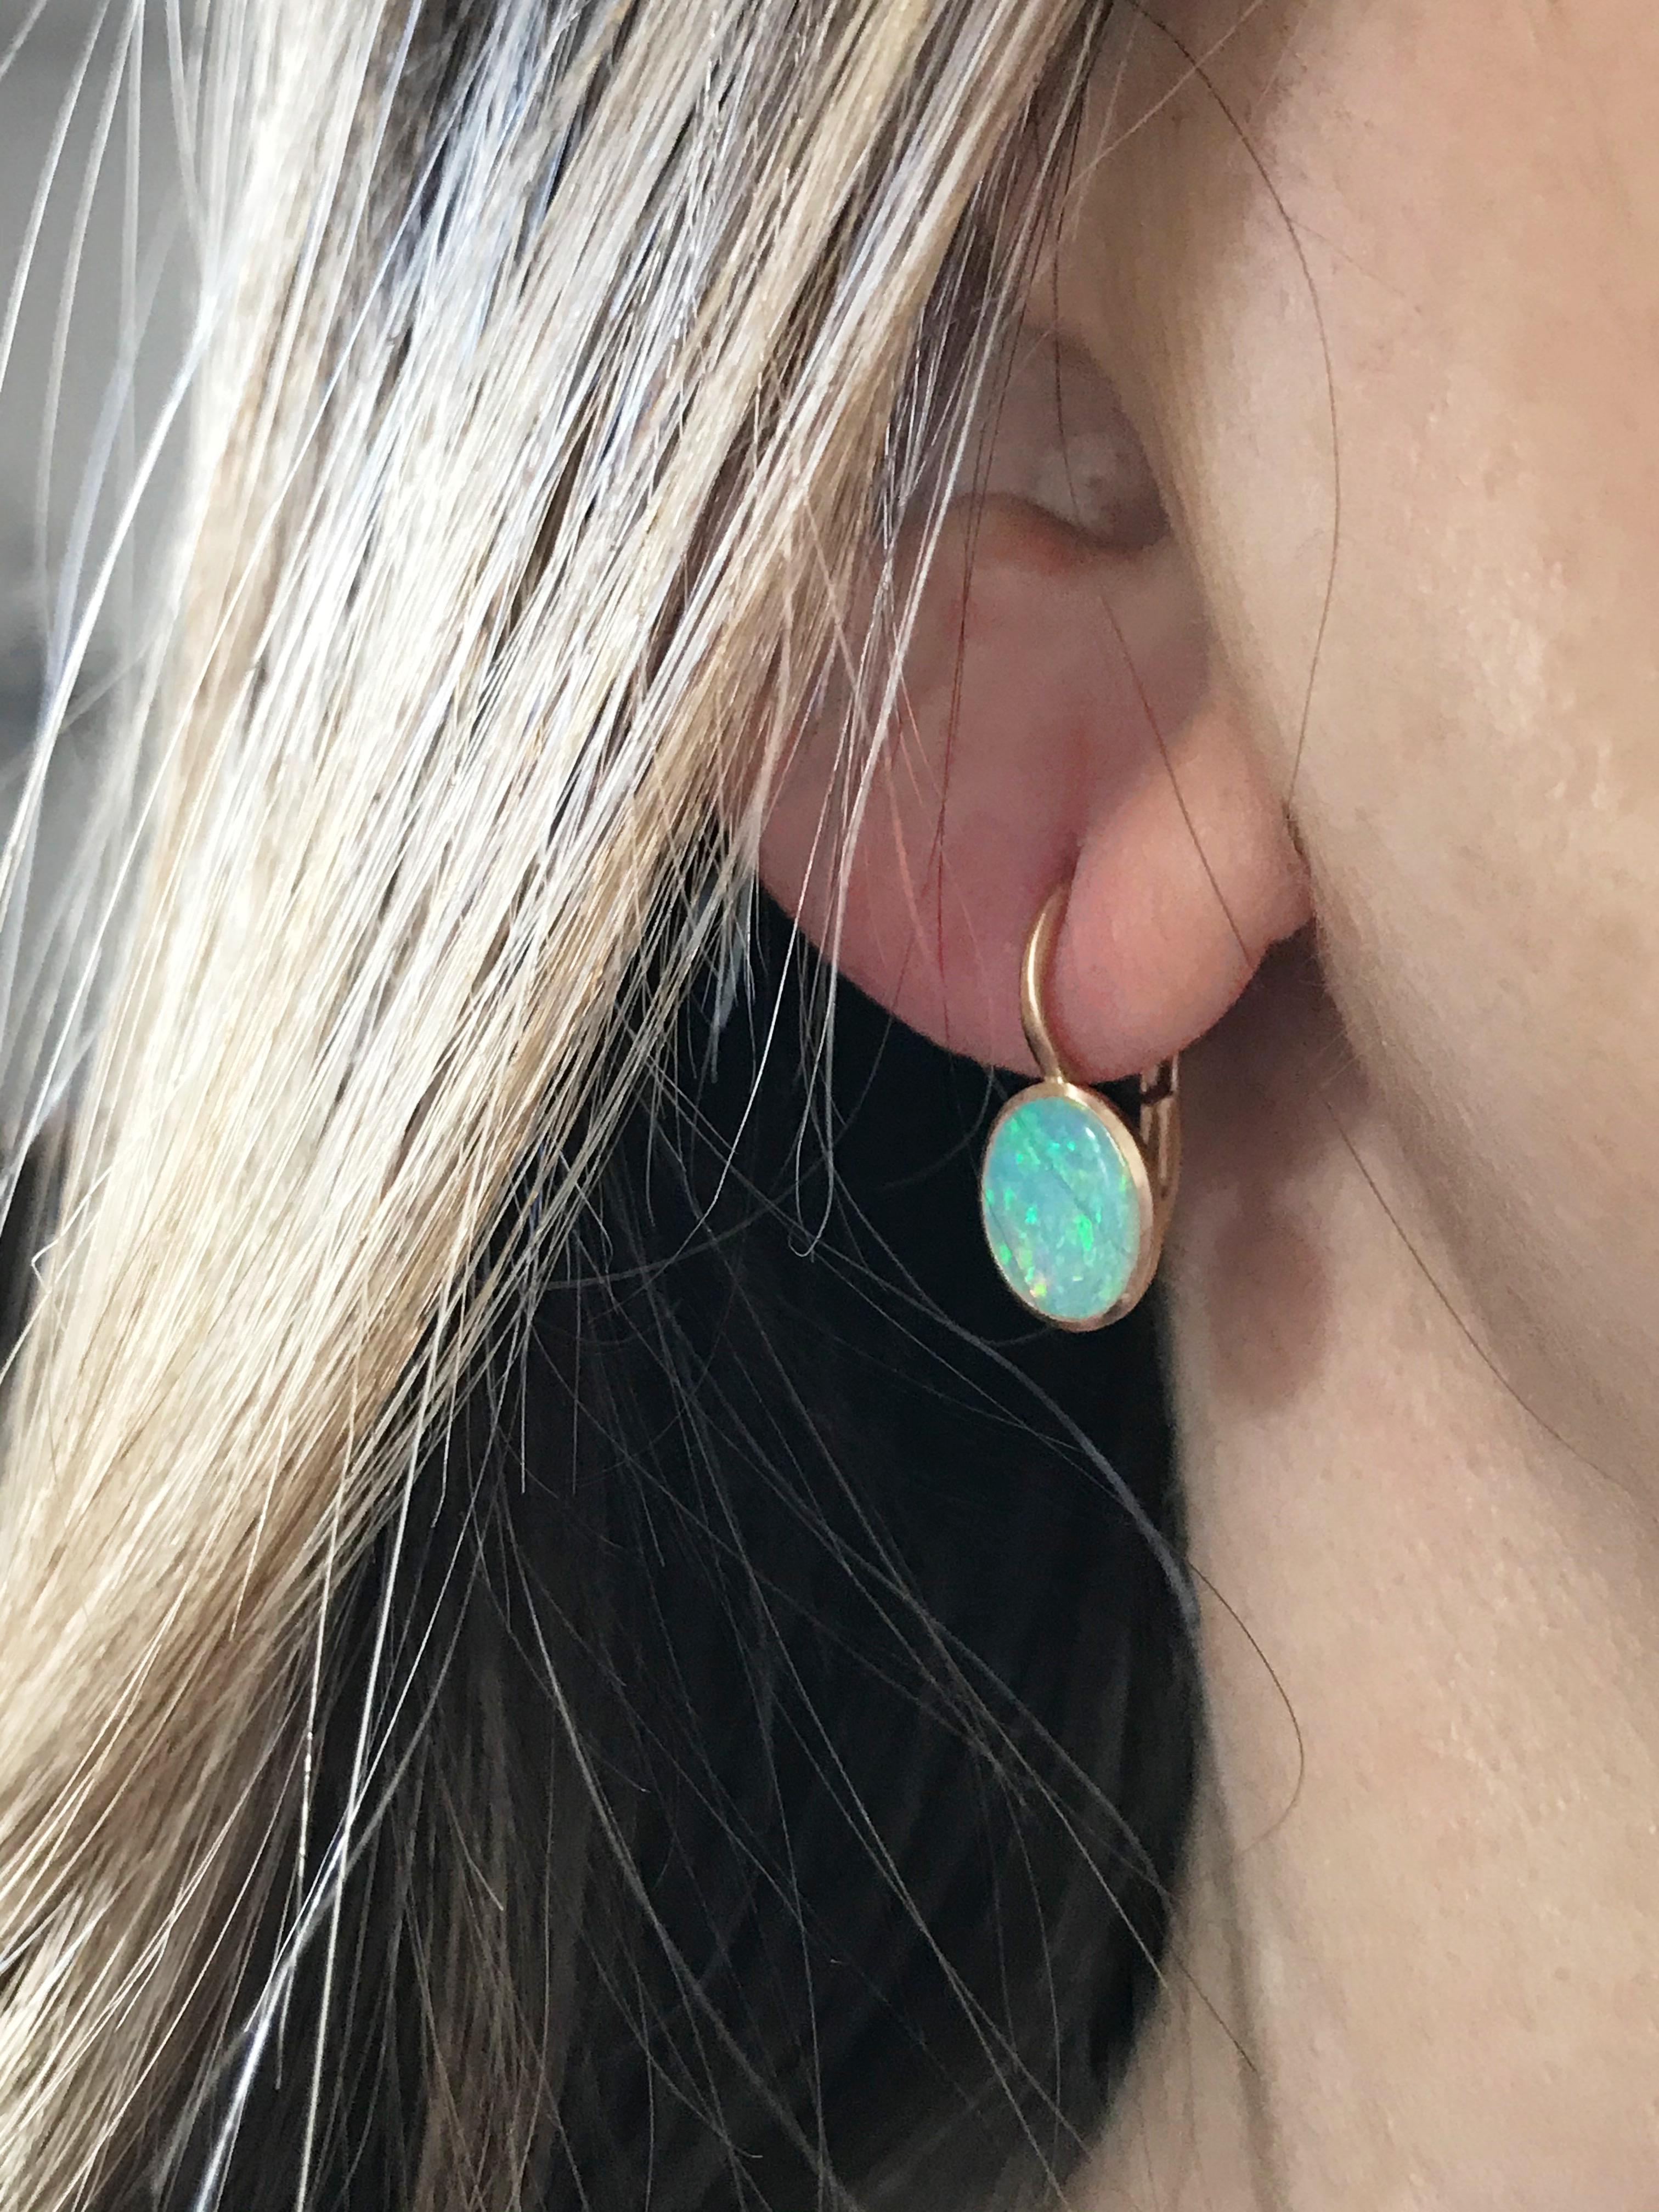 Dalben design  18k rose gold matte finishing small earrings with two bezel-set oval cabochon green blue Australian solid opals weight 1,77 carats . 
Bezel stone dimensions :
 width 8 mm
height without leverback 9,7 mm
height with leverback 18 mm
The